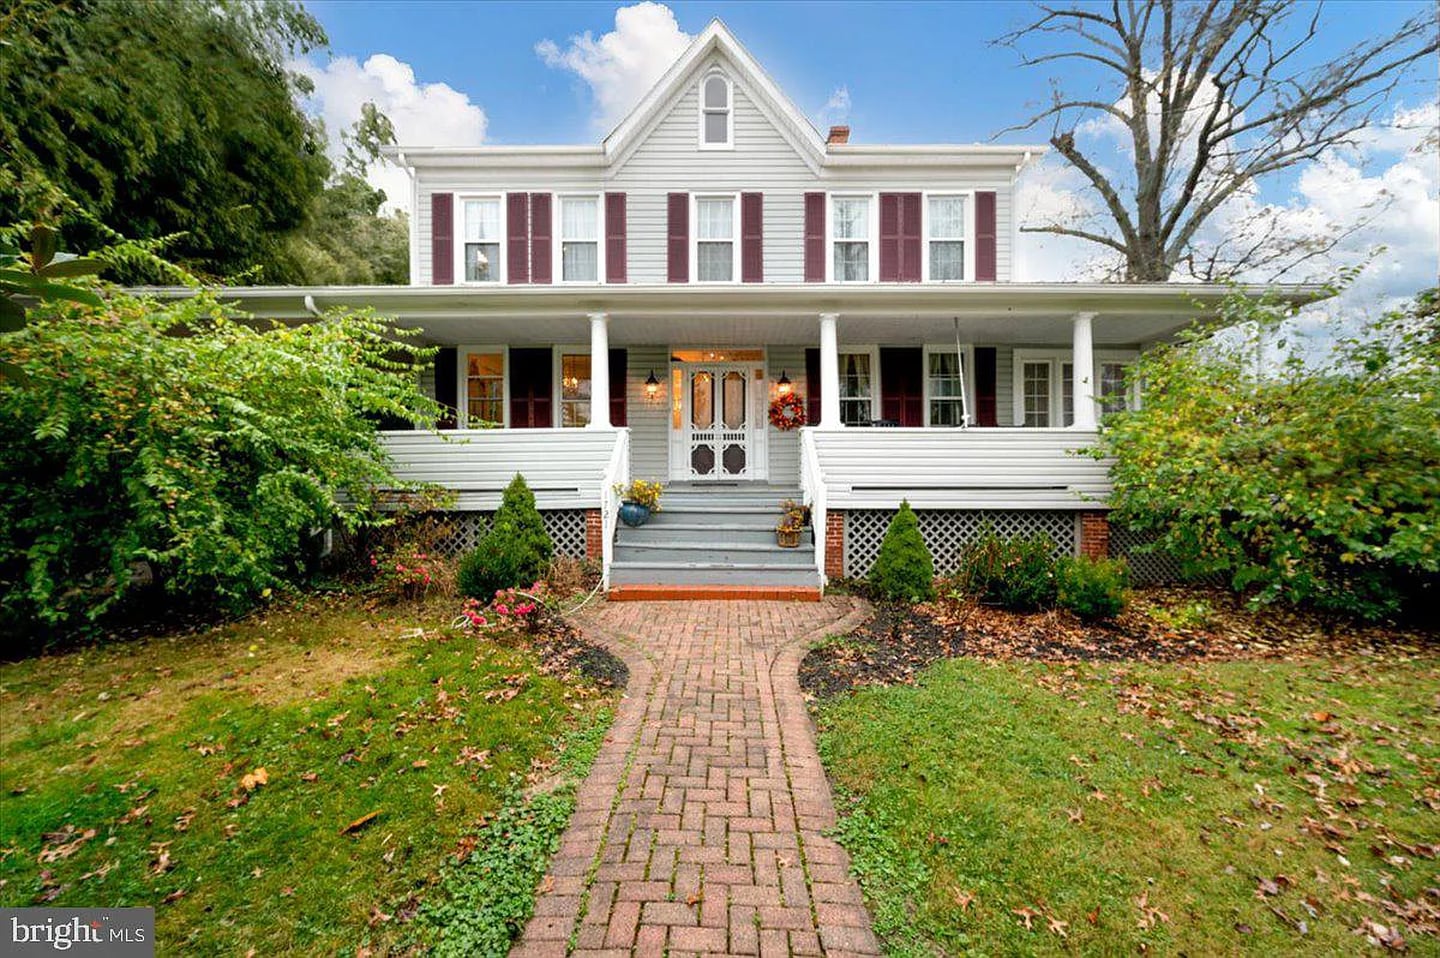 Beautiful 1900 home in historic Relay.